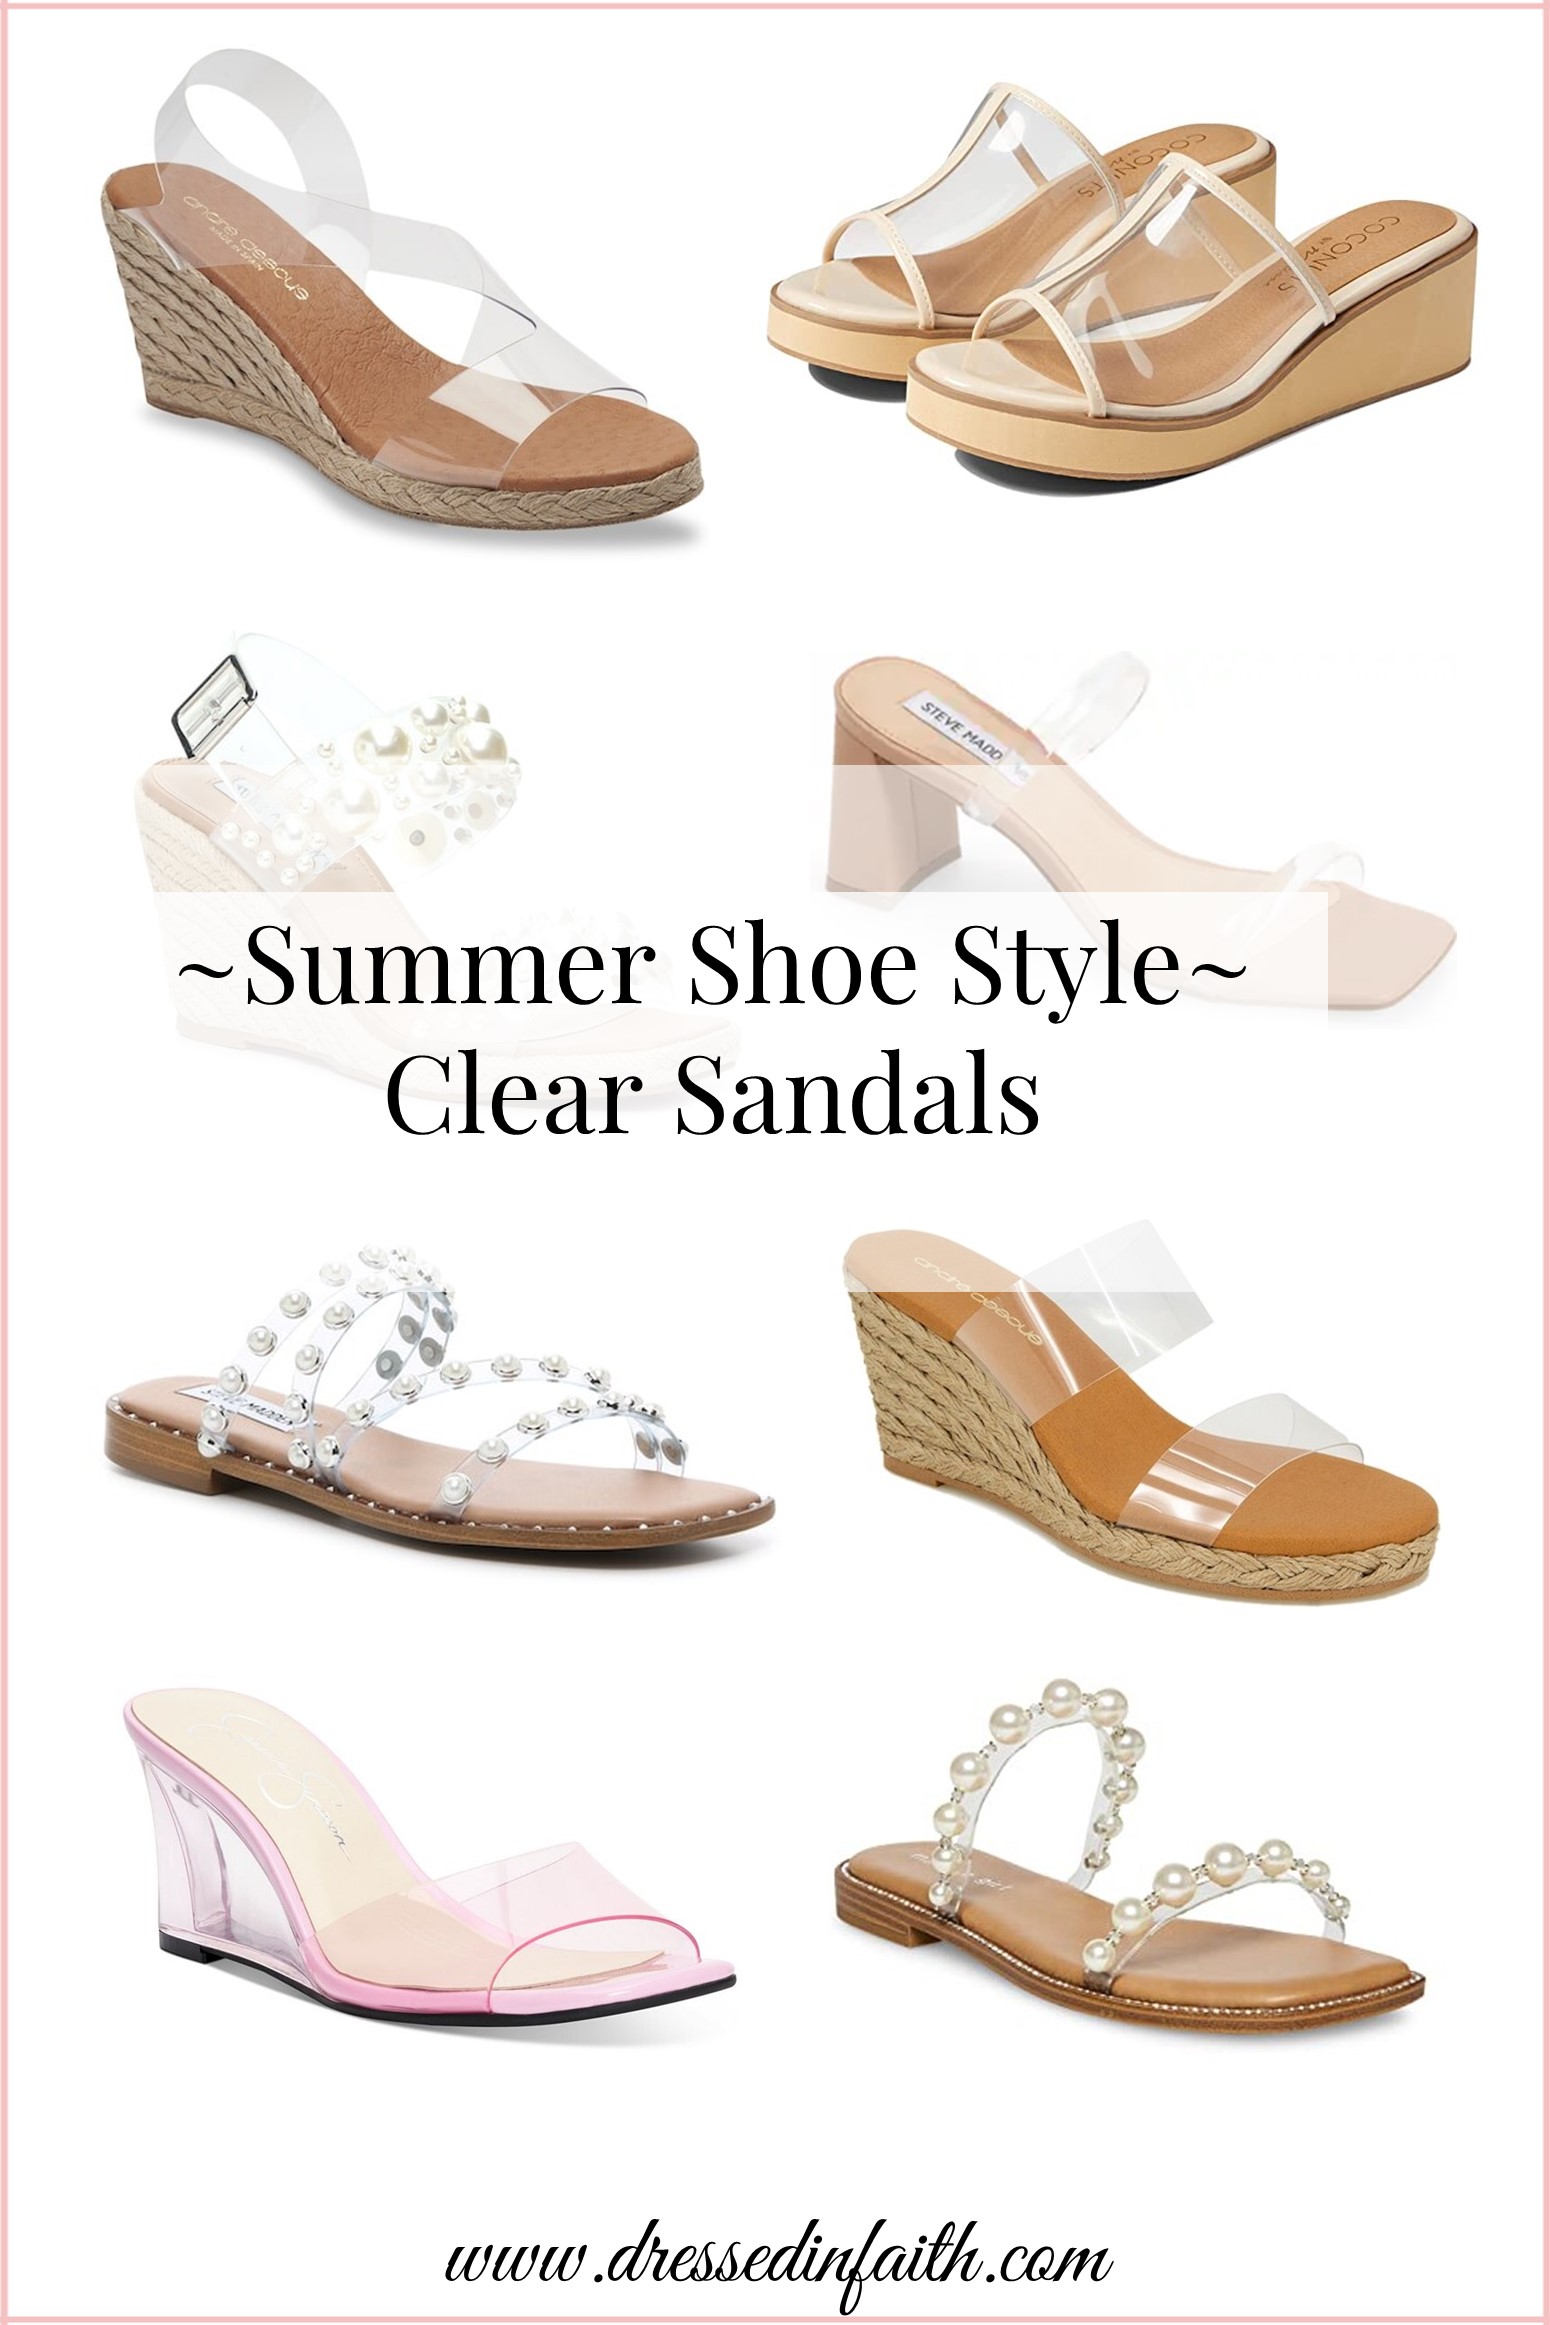 Summer Shoes Style - Clear Sandals